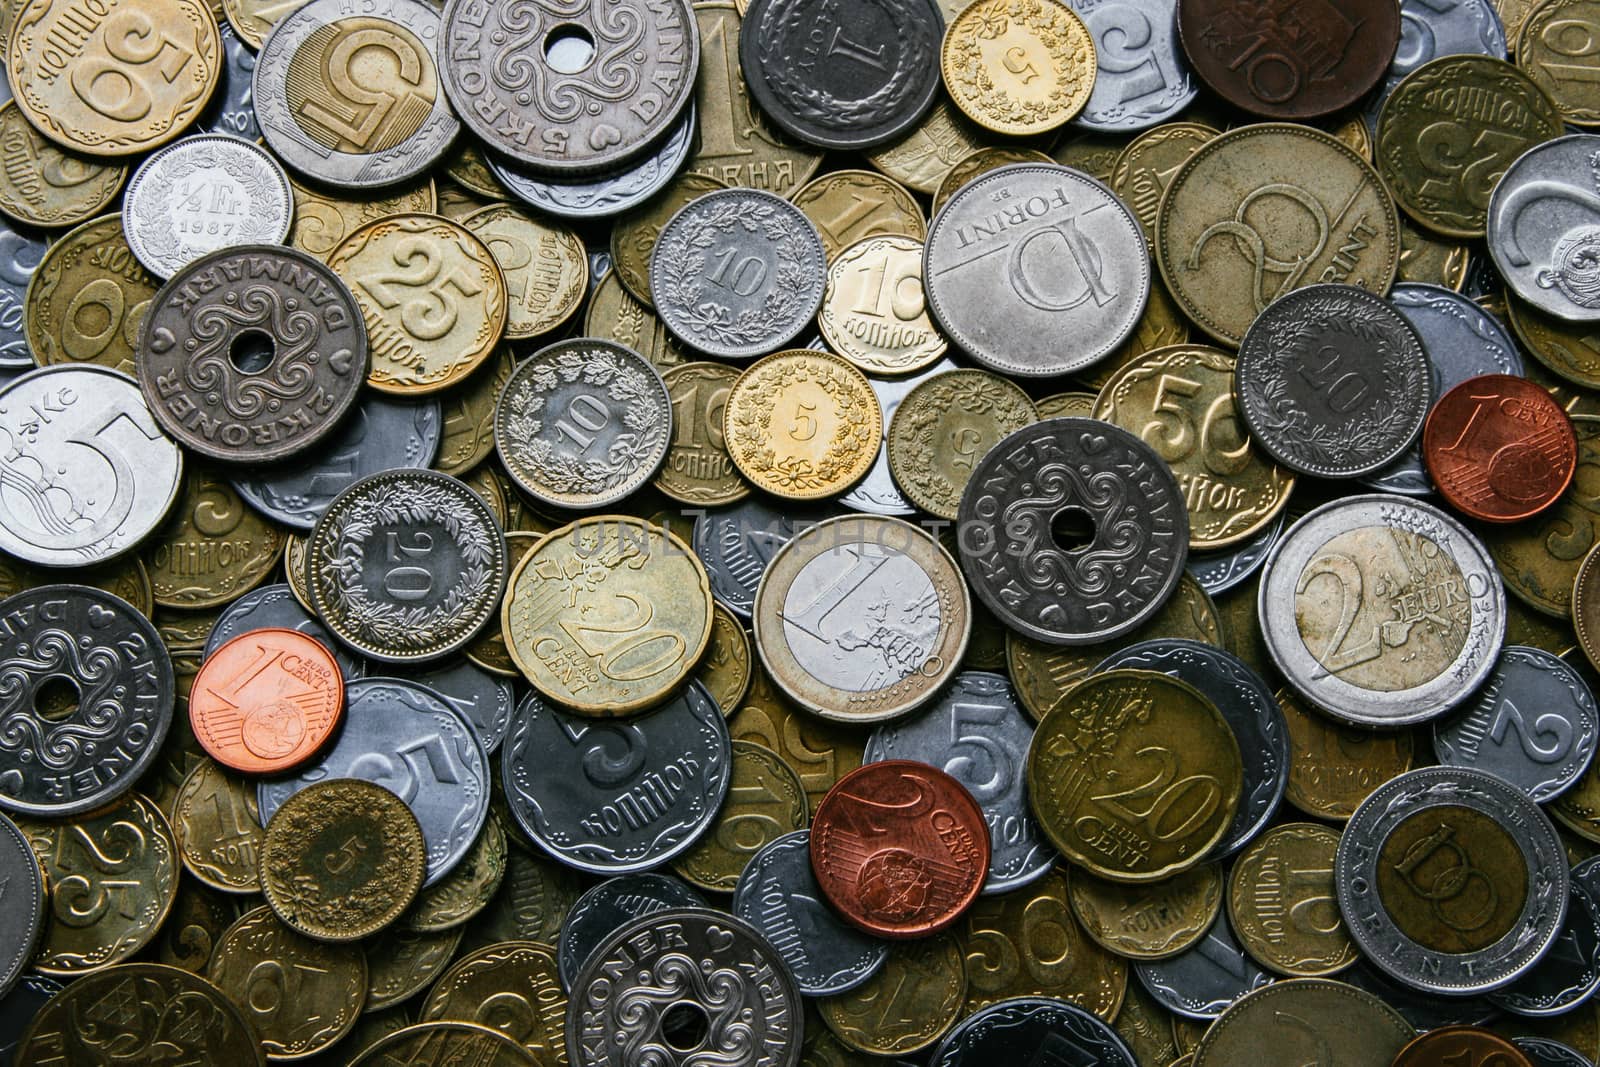 Background of different European coins of different denominations